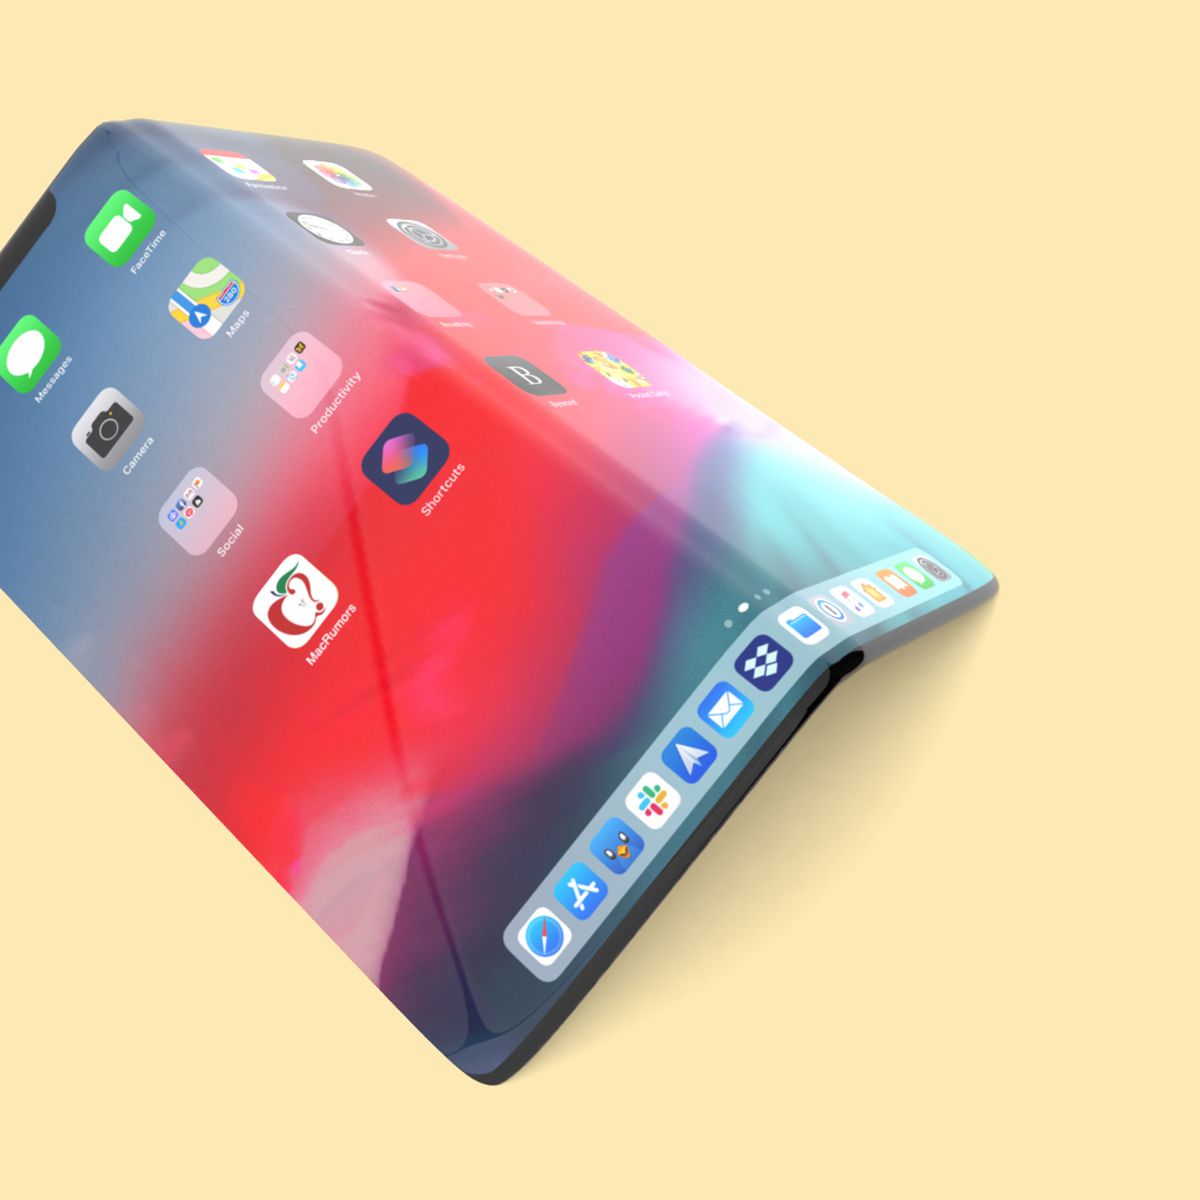 Two Foldable Iphone Prototypes Reportedly Pass Internal Durability Tests Macrumors